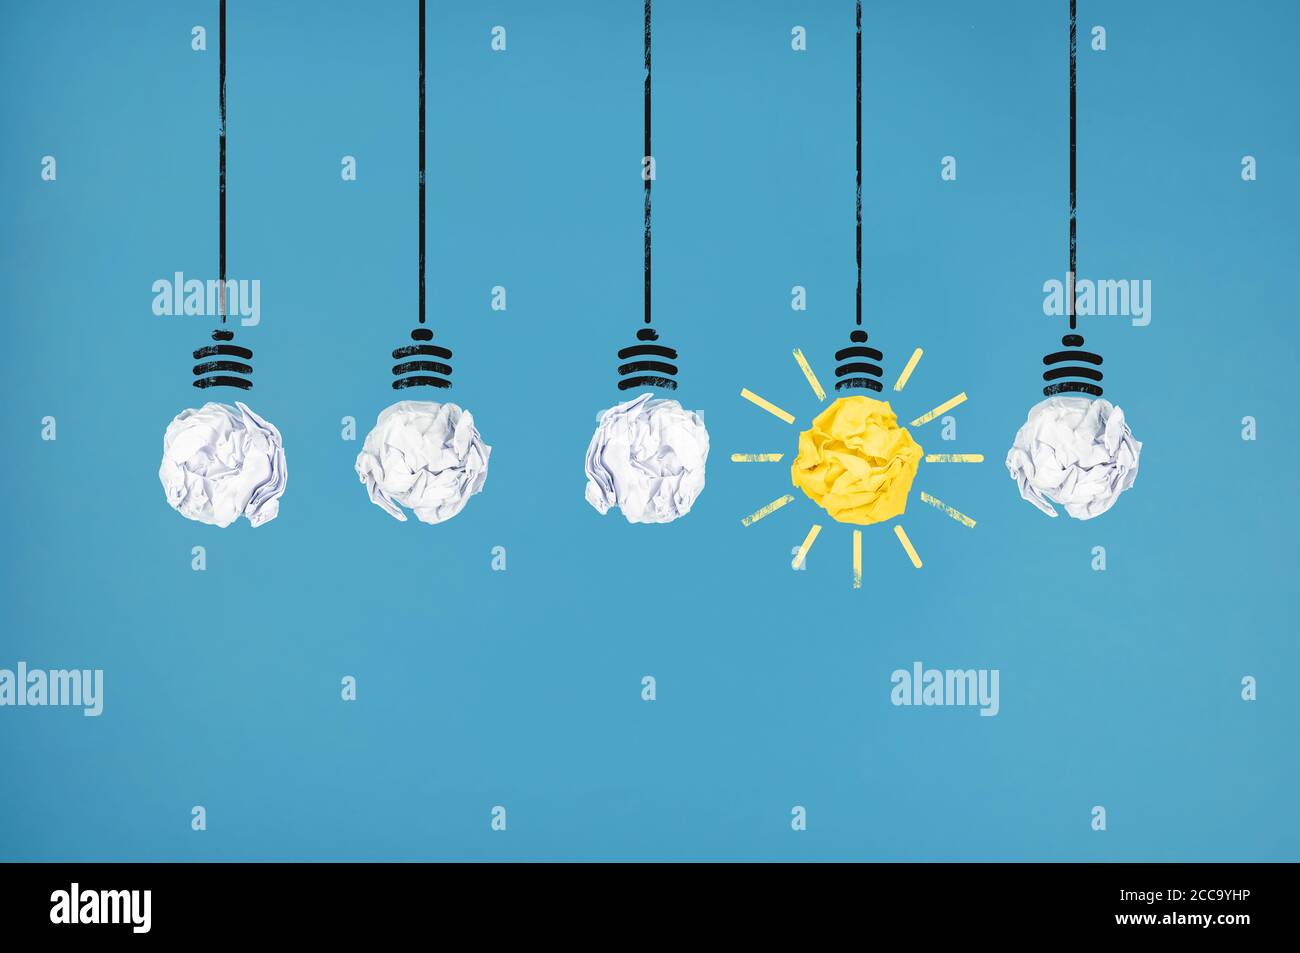 row of paper ball light bulbs with one being illuminated, brainstorming and having an idea concept Stock Photo